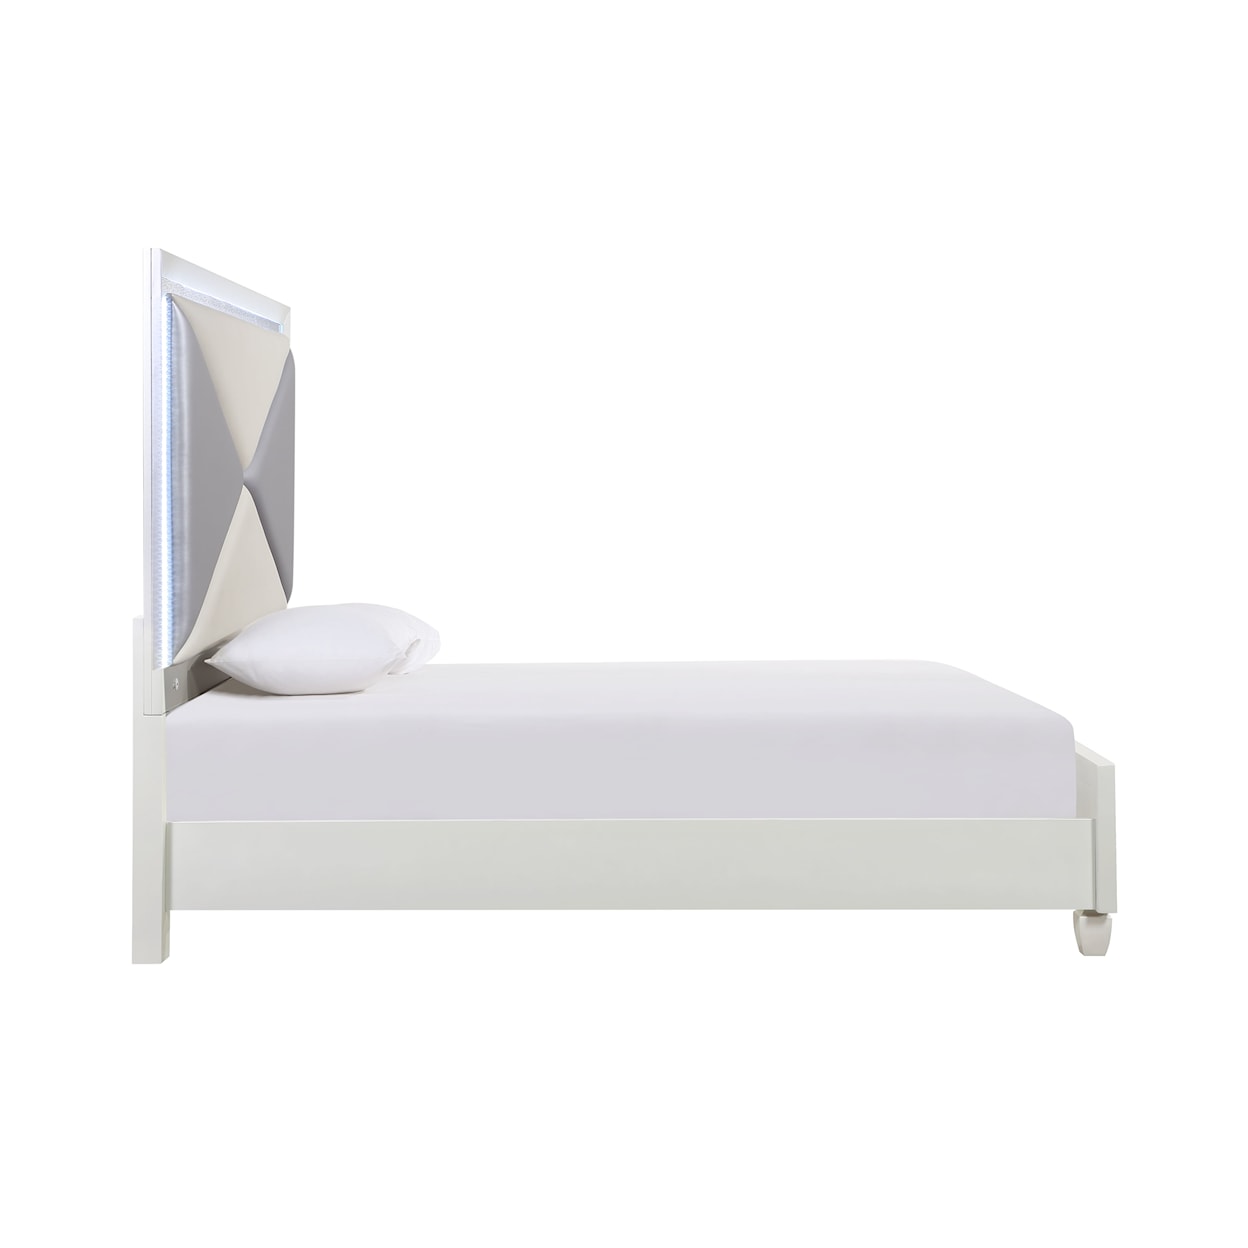 New Classic Harlequin King Bed